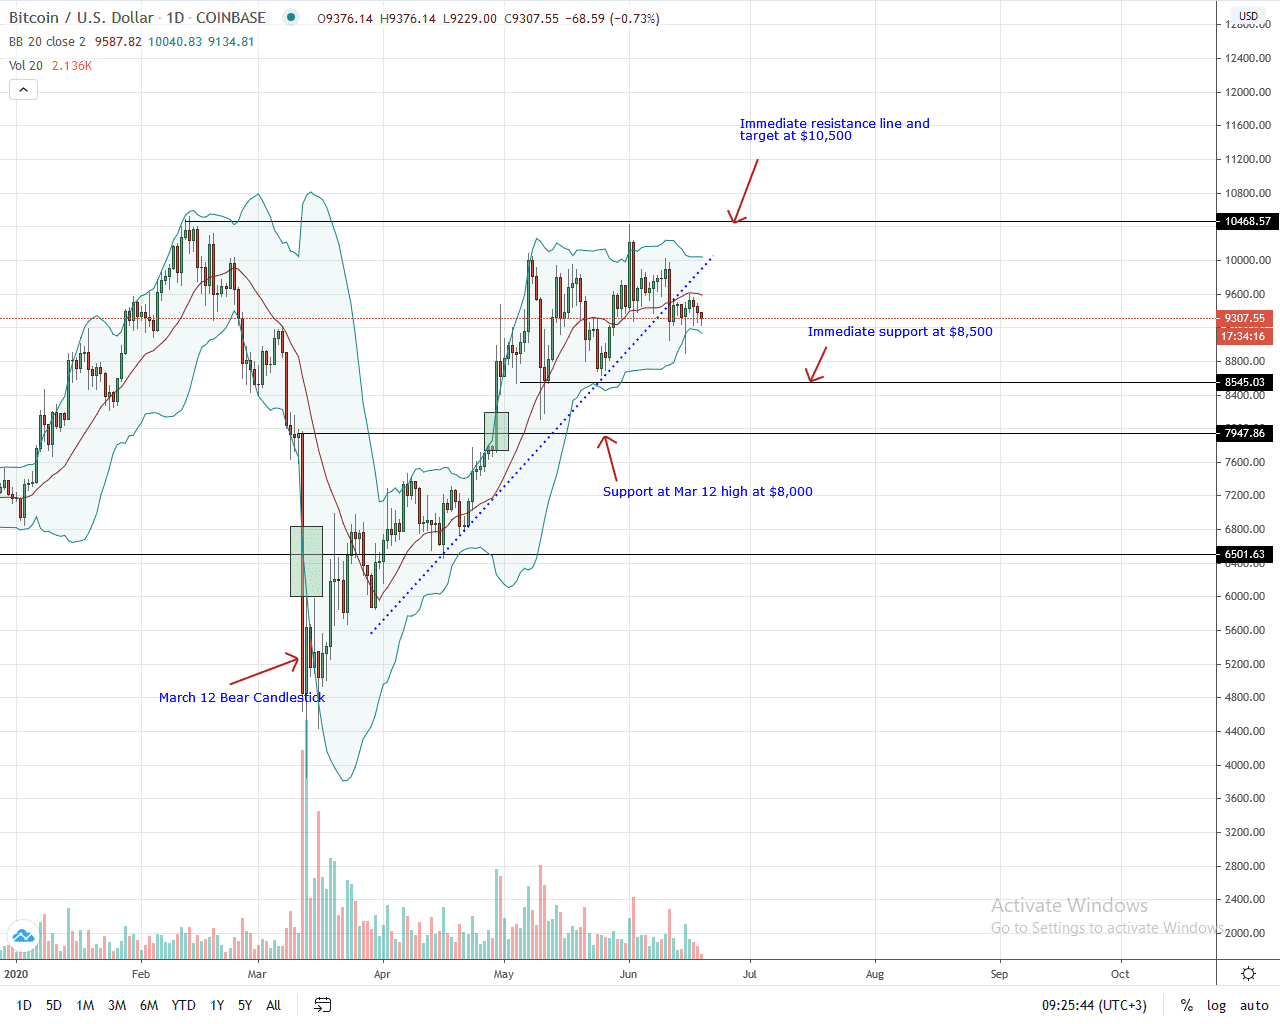 Bitcoin Daily Chart for June 19, 2020